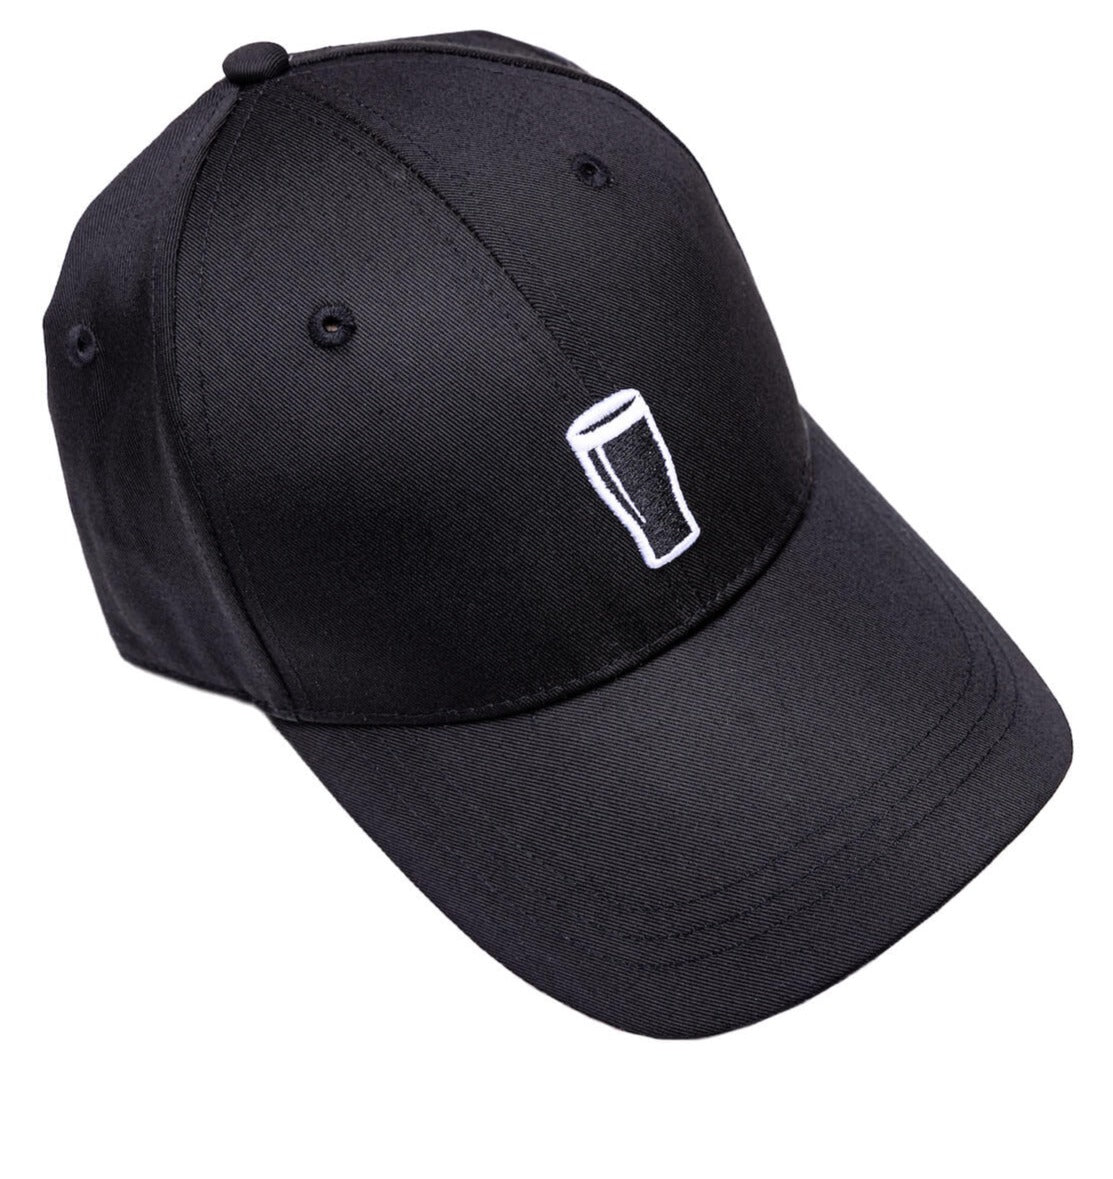 Guinness Storehouse Exclusive Sustainable Basebal Cap, Made from 100% Recycled Plastic Bottles